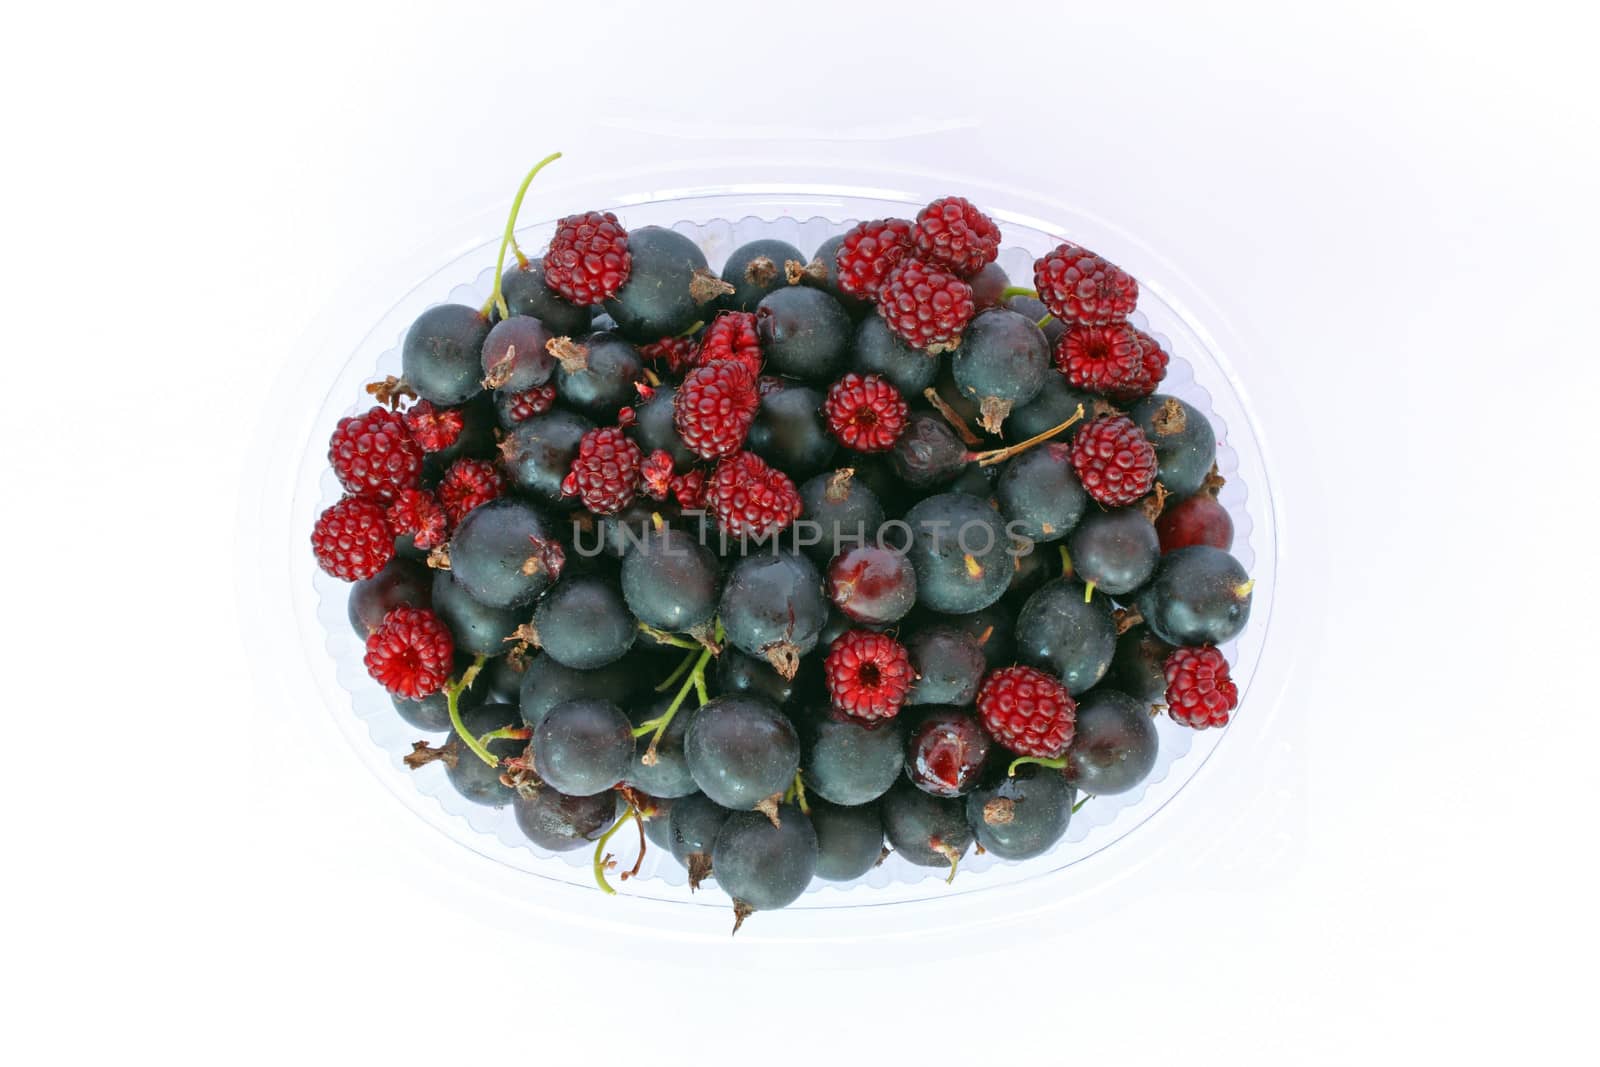 Fruit of Jostaberry, New Hybrid Between Black Currant and Gooseberry, on white